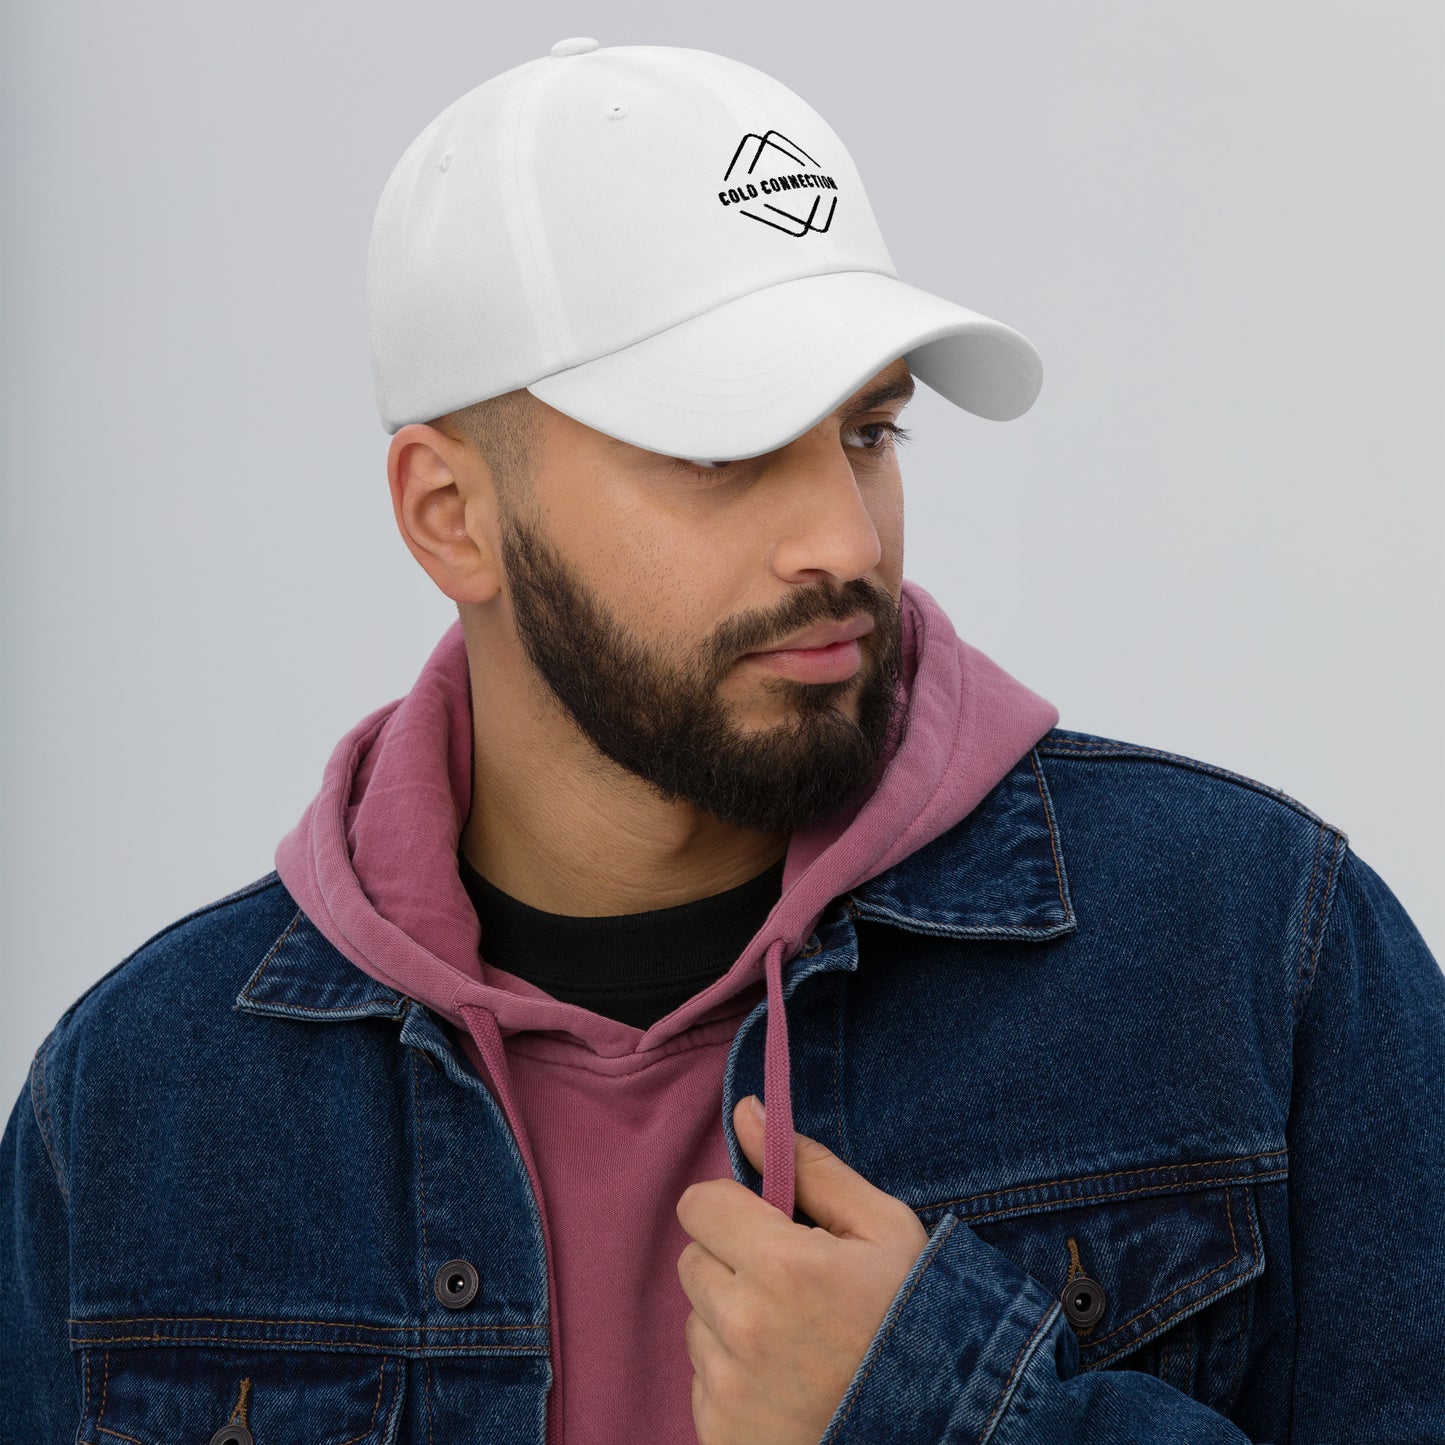 Cold Connection, logo (embroidery), Dad hat